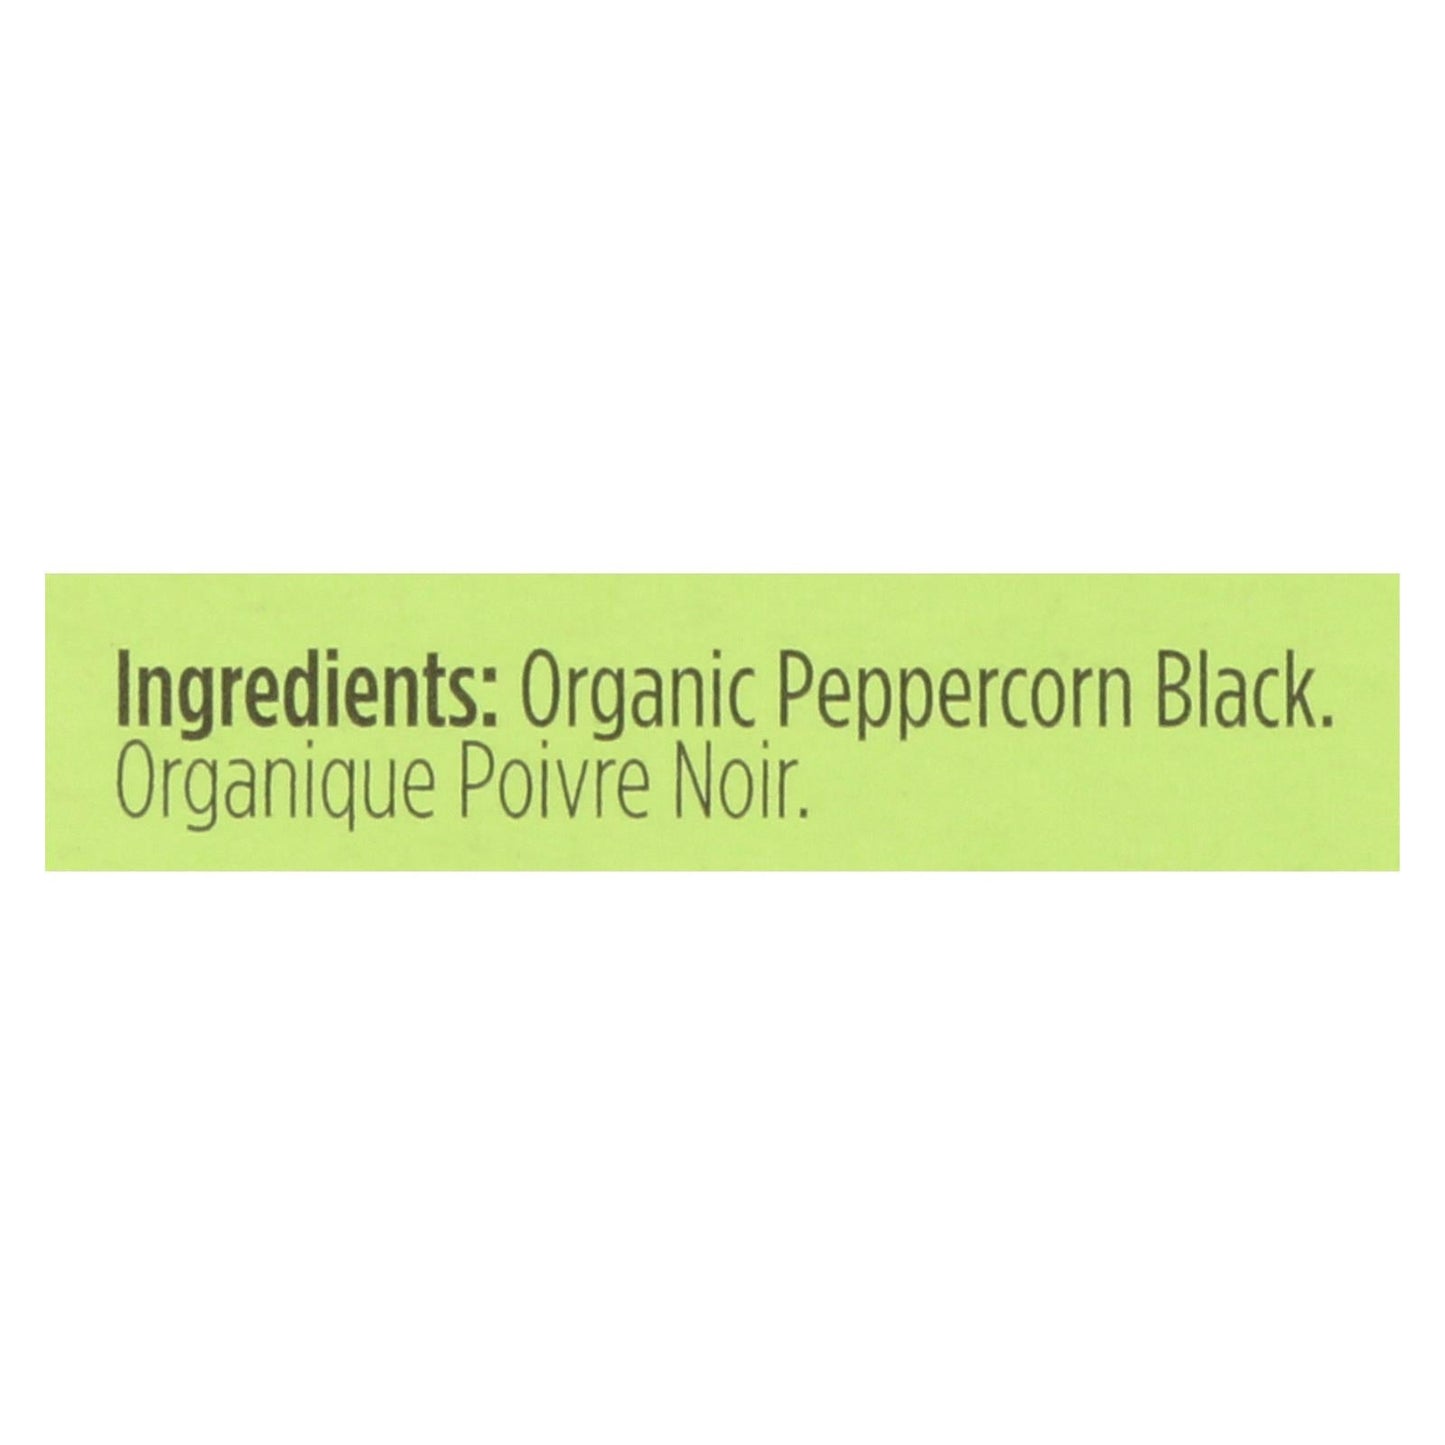 Buy Spicely Organics - Organic Peppercorn - Black - Case Of 6 - 0.45 Oz.  at OnlyNaturals.us